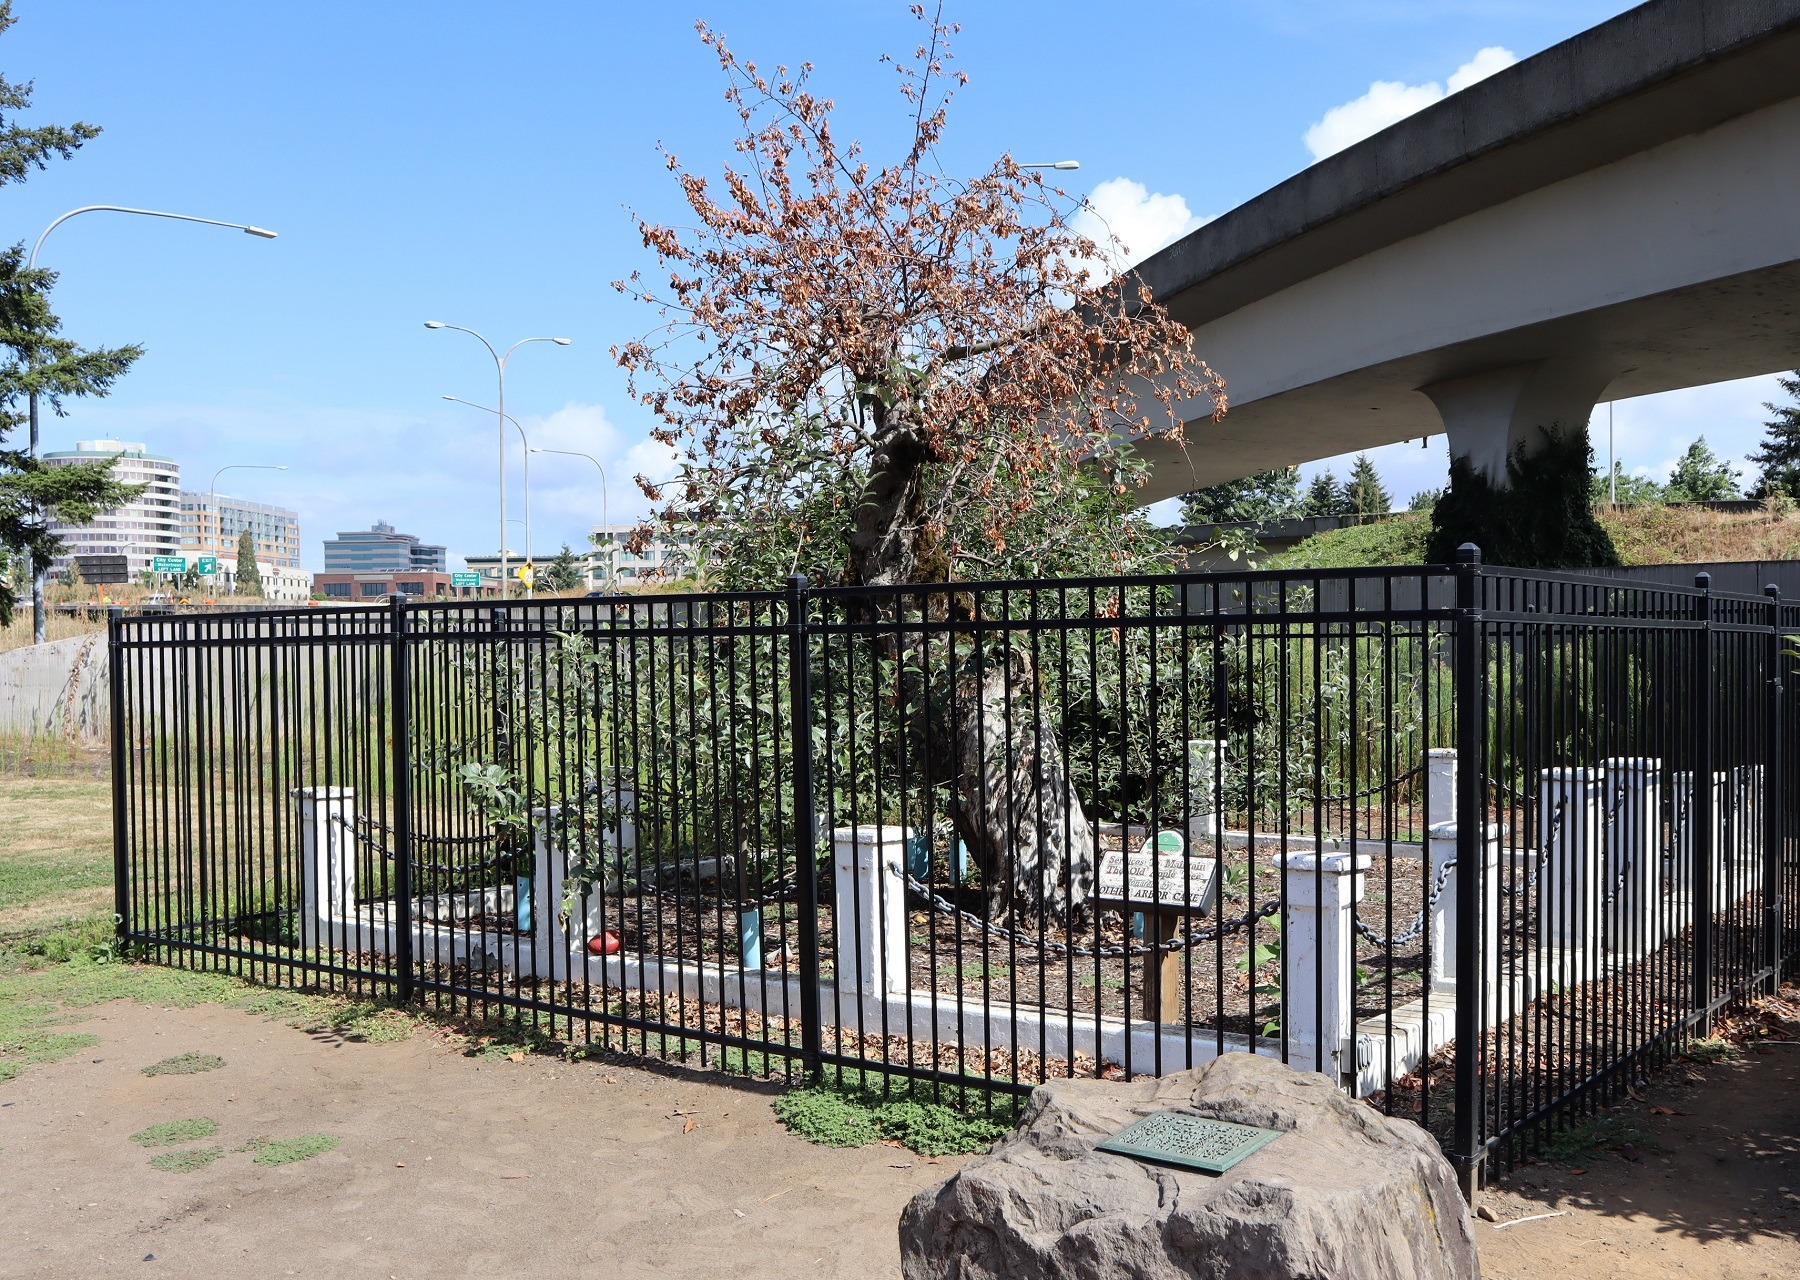 The historic Old Apple Tree in Vancouver, Washington, died this summer at age 194. CREDIT: Tom Banse/N3